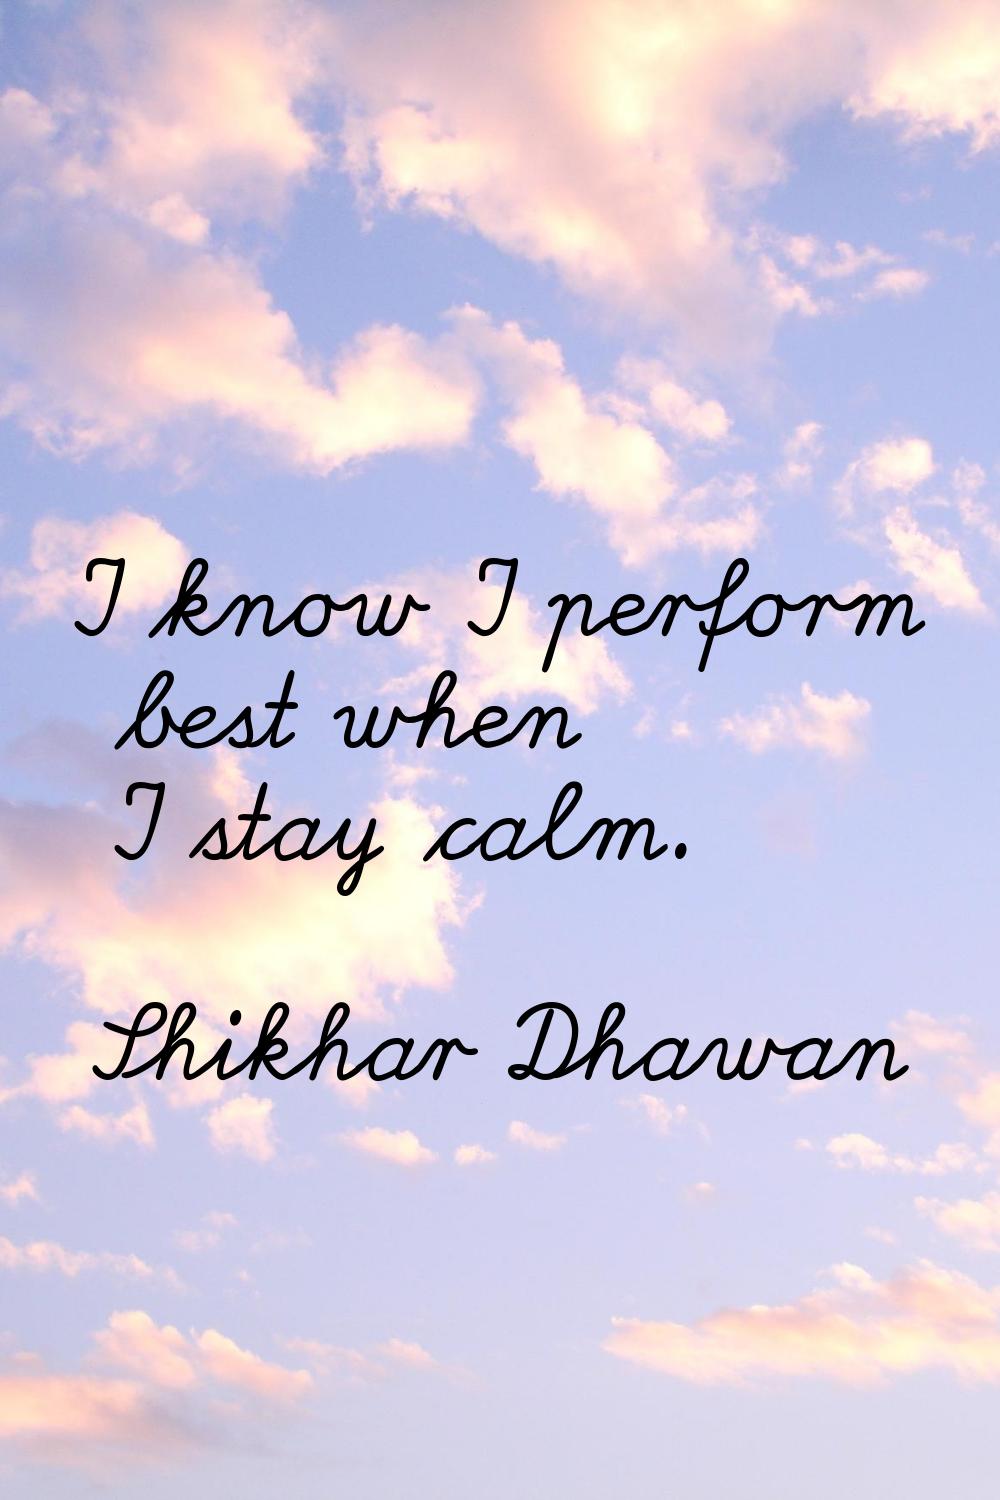 I know I perform best when I stay calm.